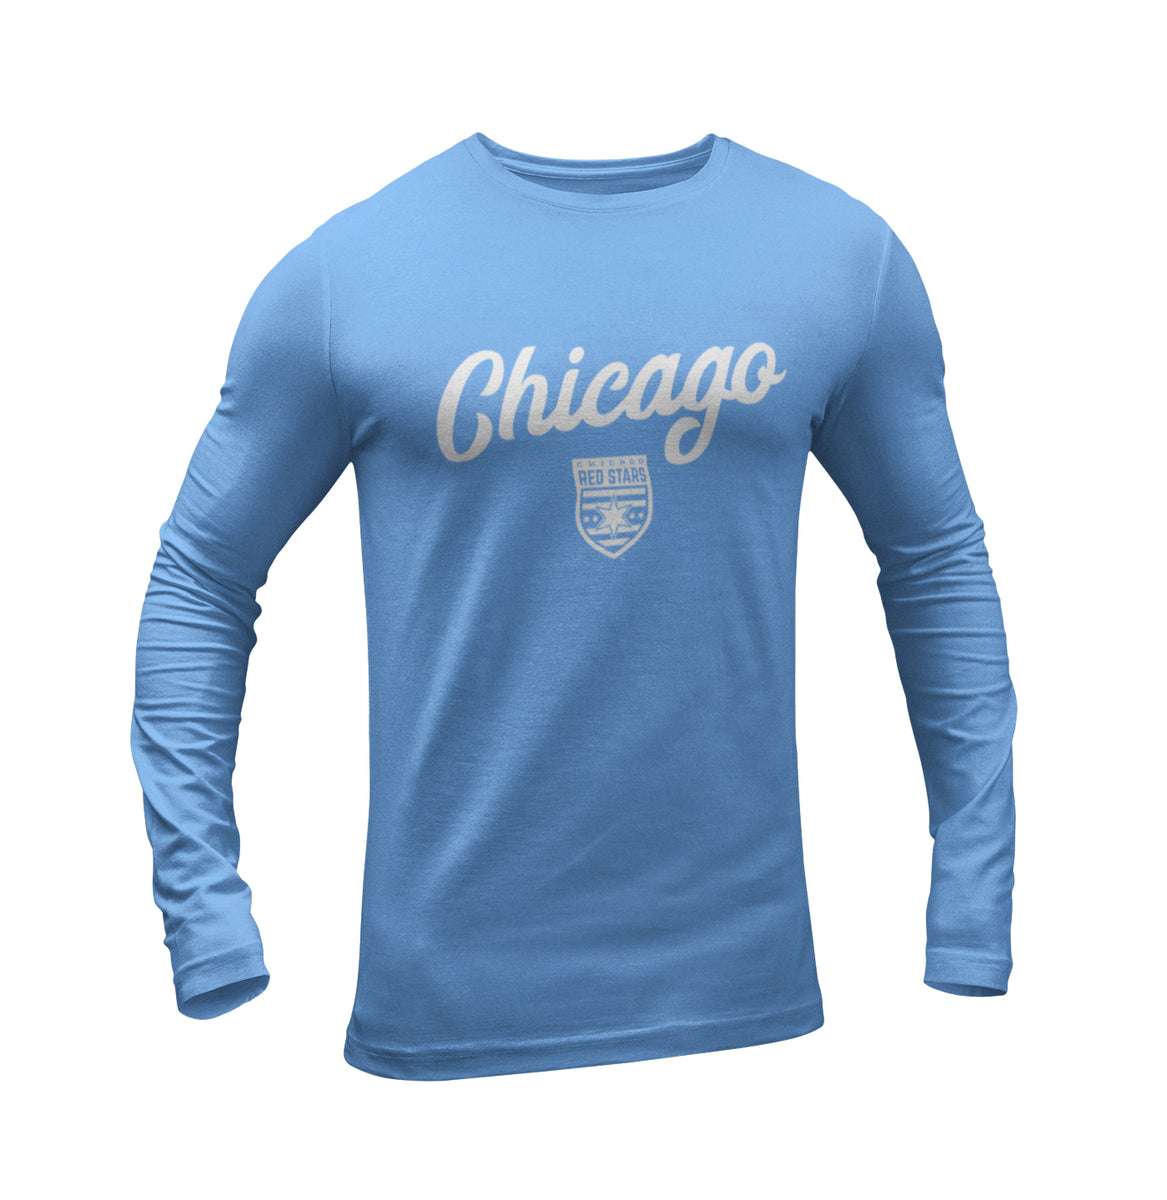 Chicago Red Stars Nike Youth LS Cotton Tee White / YL